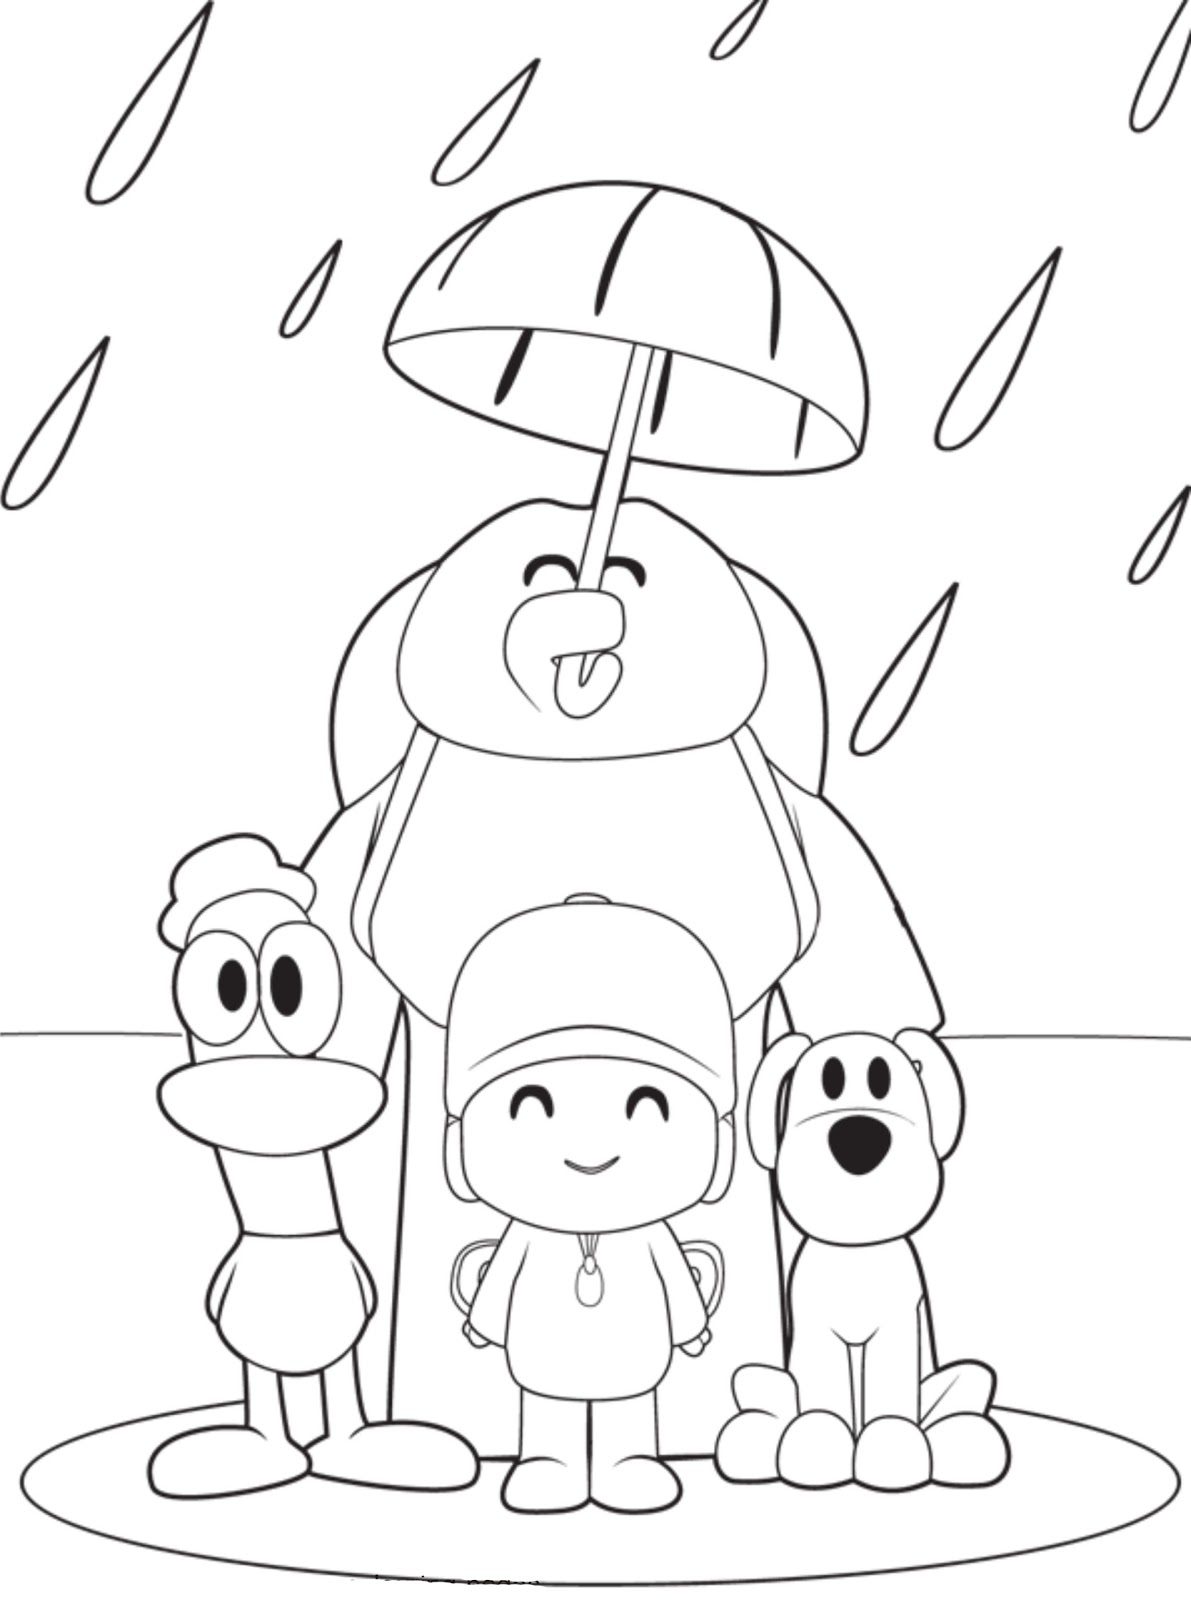 Free Printable Coloring Pages Cool Coloring Pages Pocoyo Coloring Pages